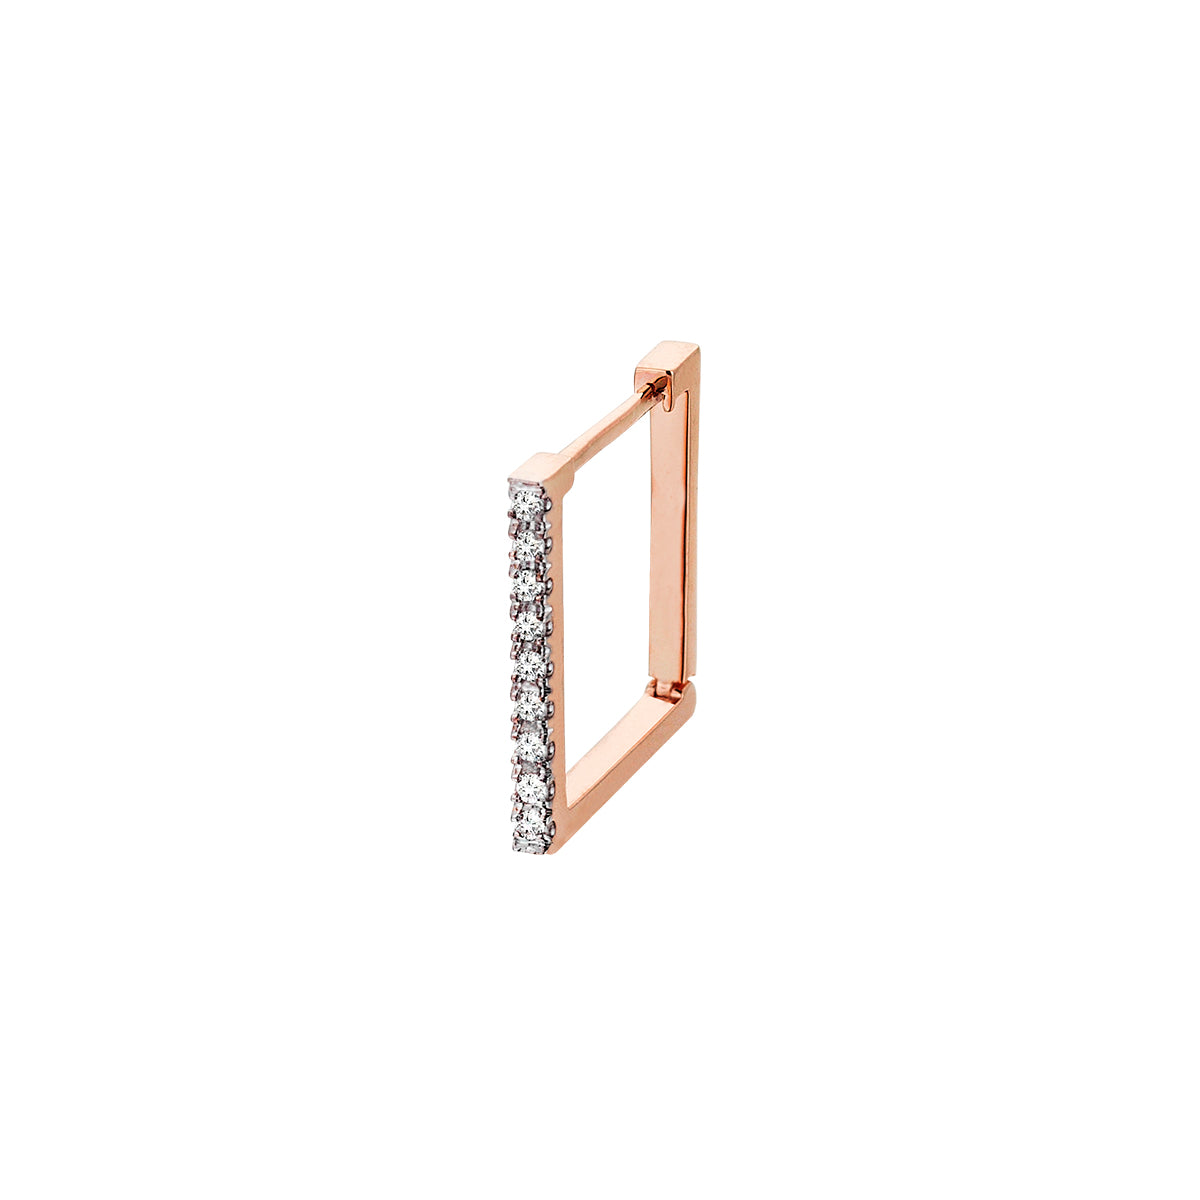 Mini Square Earring in Rose Gold - Her Story Shop